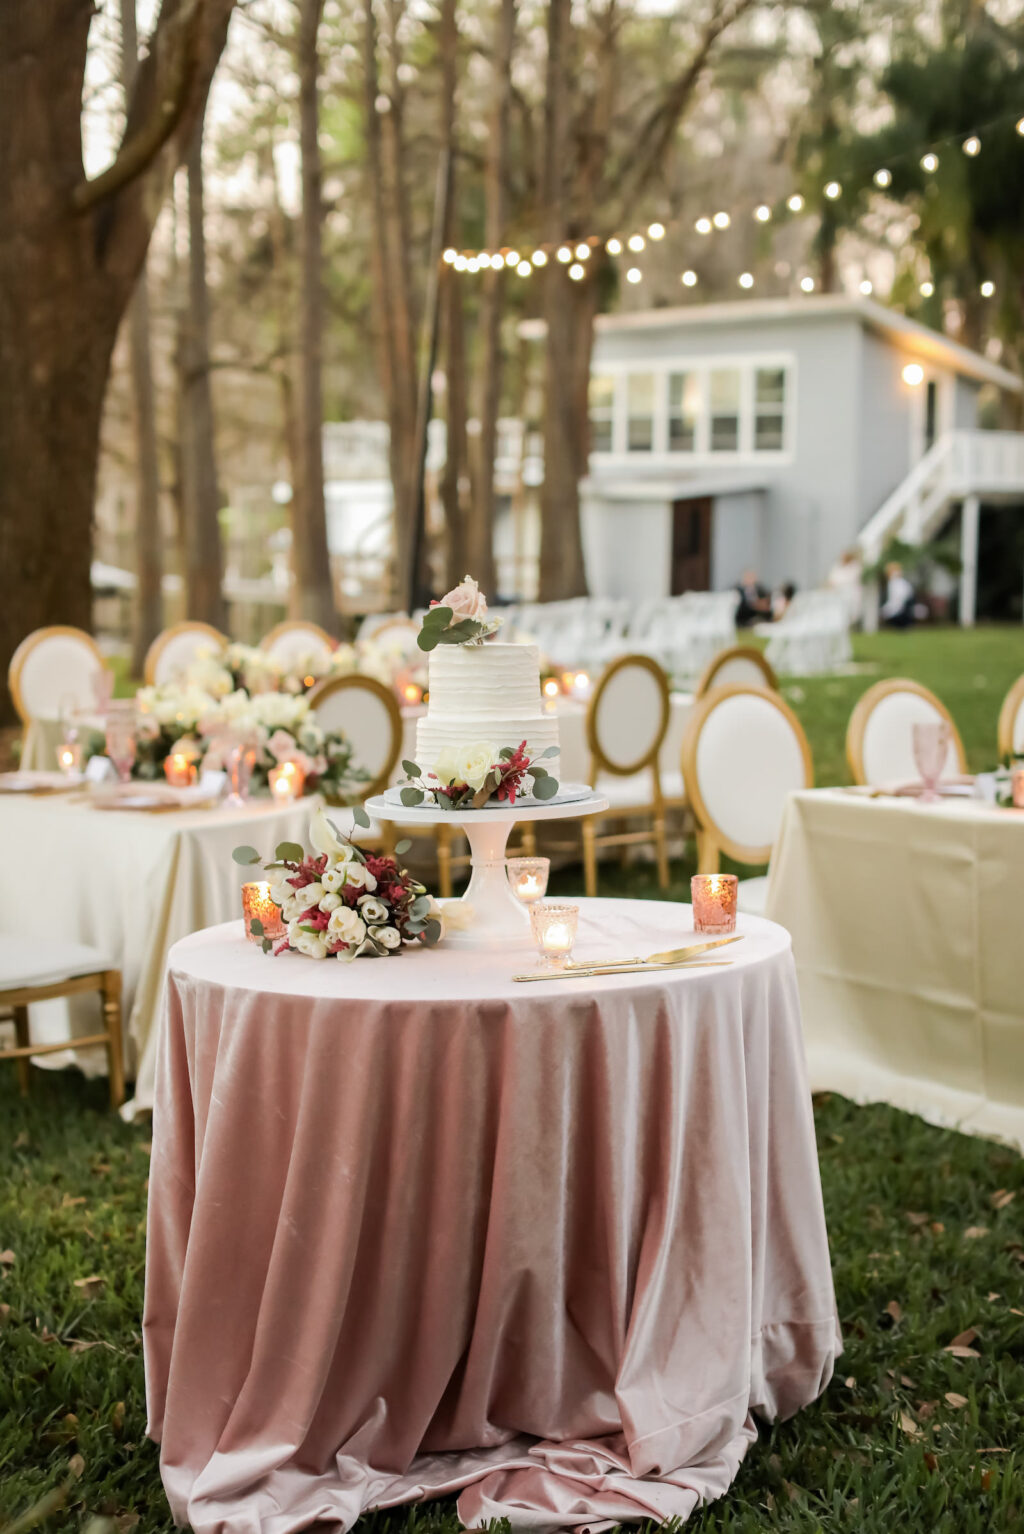 Romantic Outdoor Wedding Reception Decor, Dessert Table with Blush Pink Table Linen, Two Tier White Wedding Cake with Flowers | Tampa Bay Wedding Photographer Lifelong Photography Studio | Wedding Planner Special Moments Event Planning | Wedding Rentals Kate Ryan Event Rentals